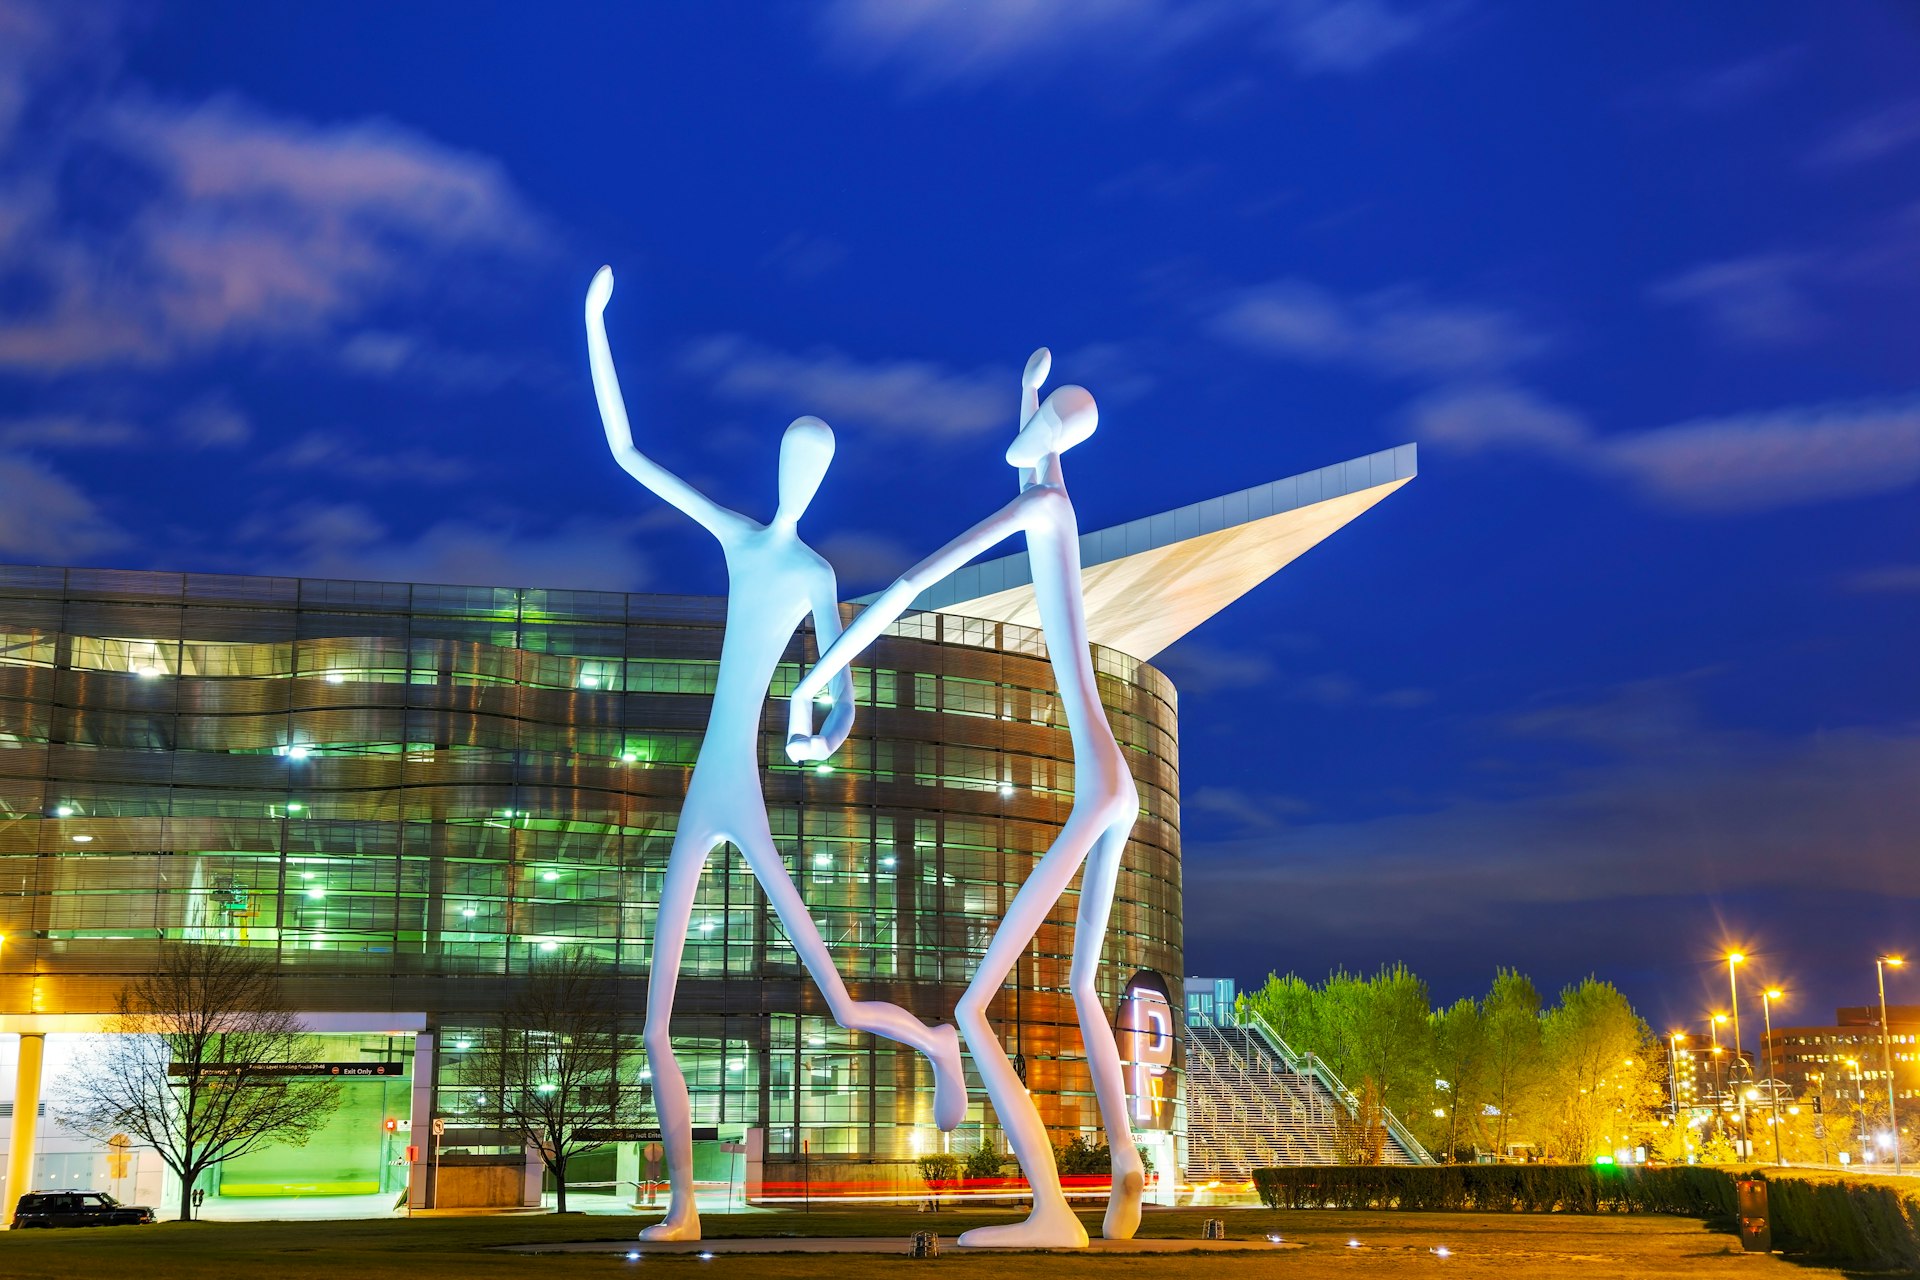 The Dancers public sculpture at night, in front of the Denver Performing Arts Complex.